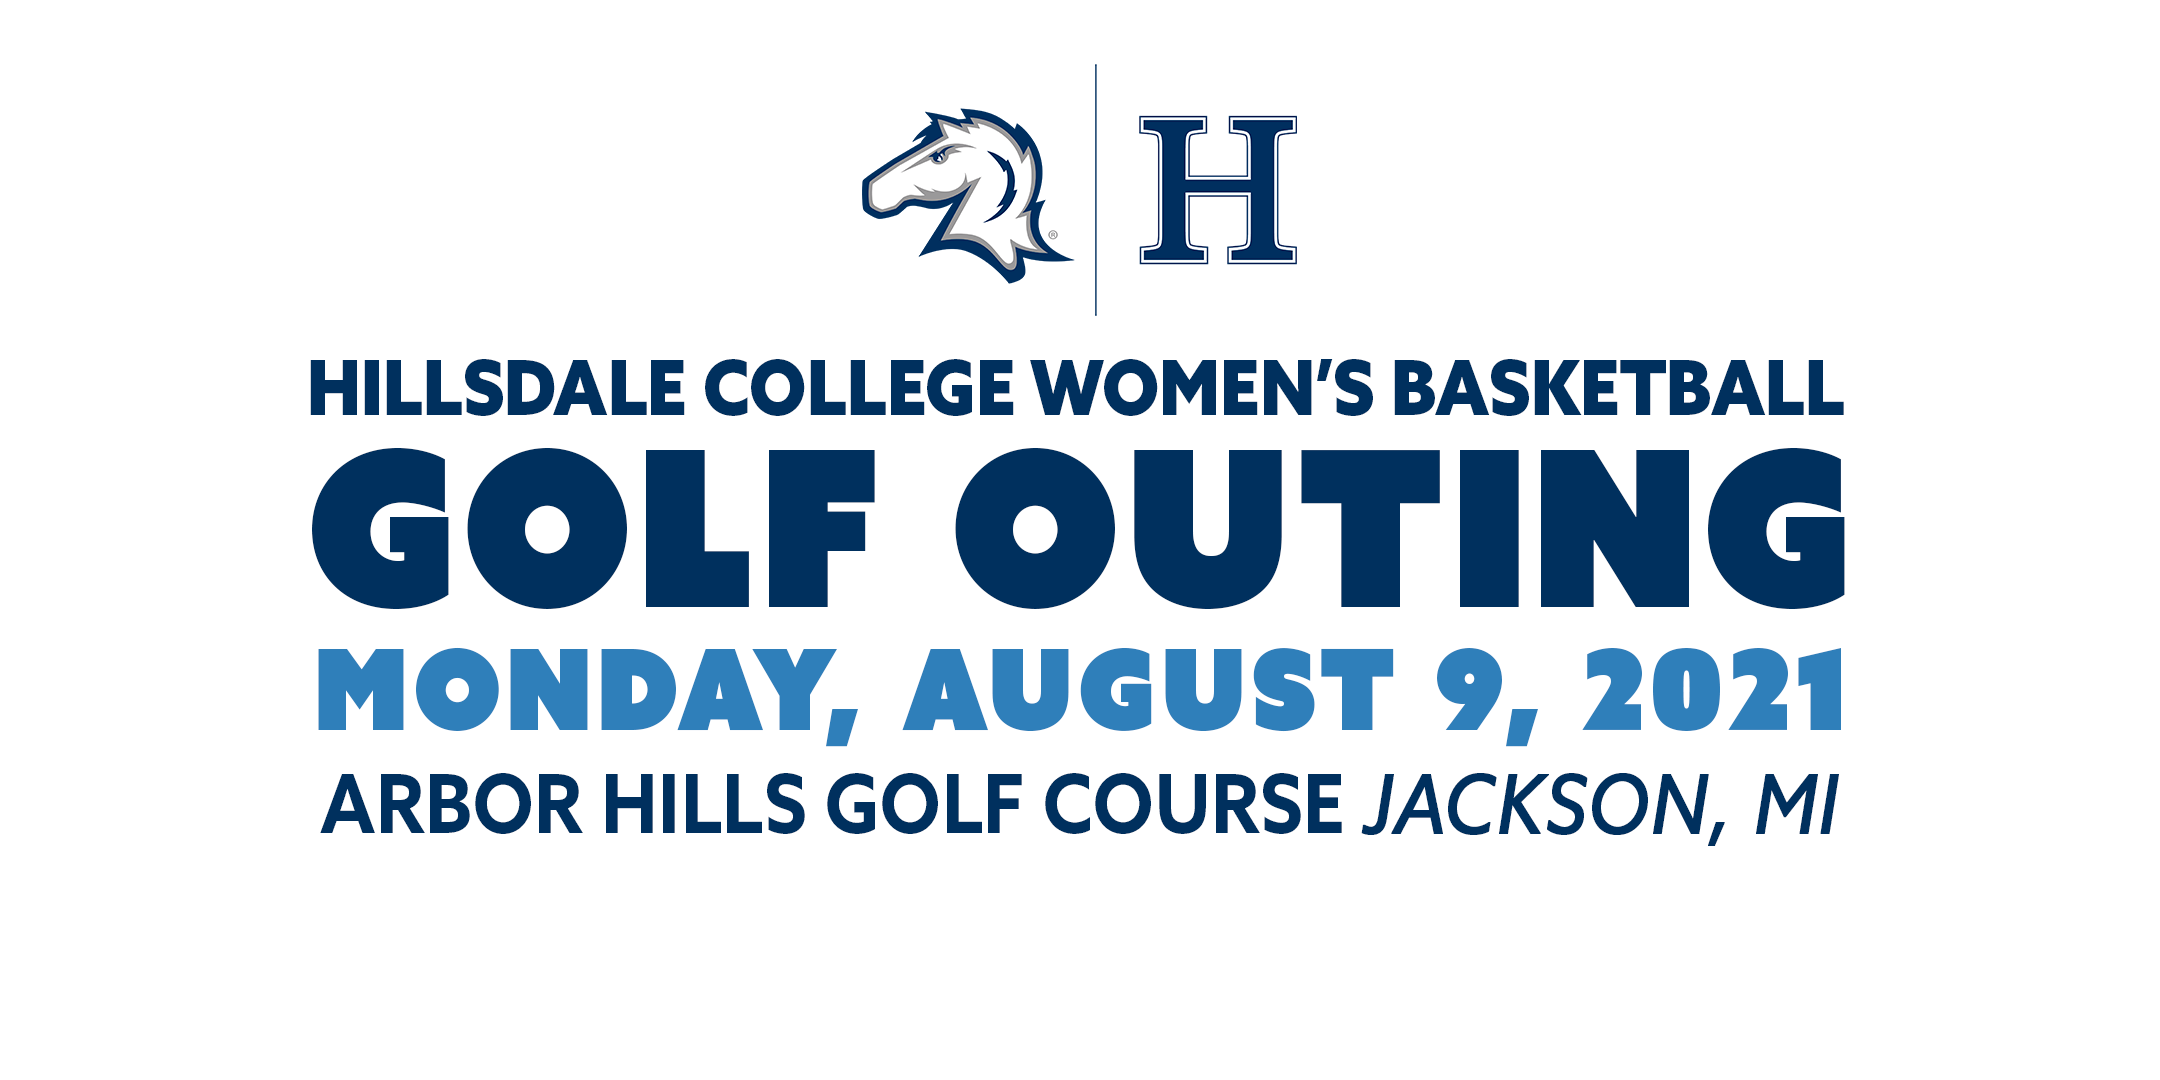 Hillsdale College Women's Basketball Golf Outing